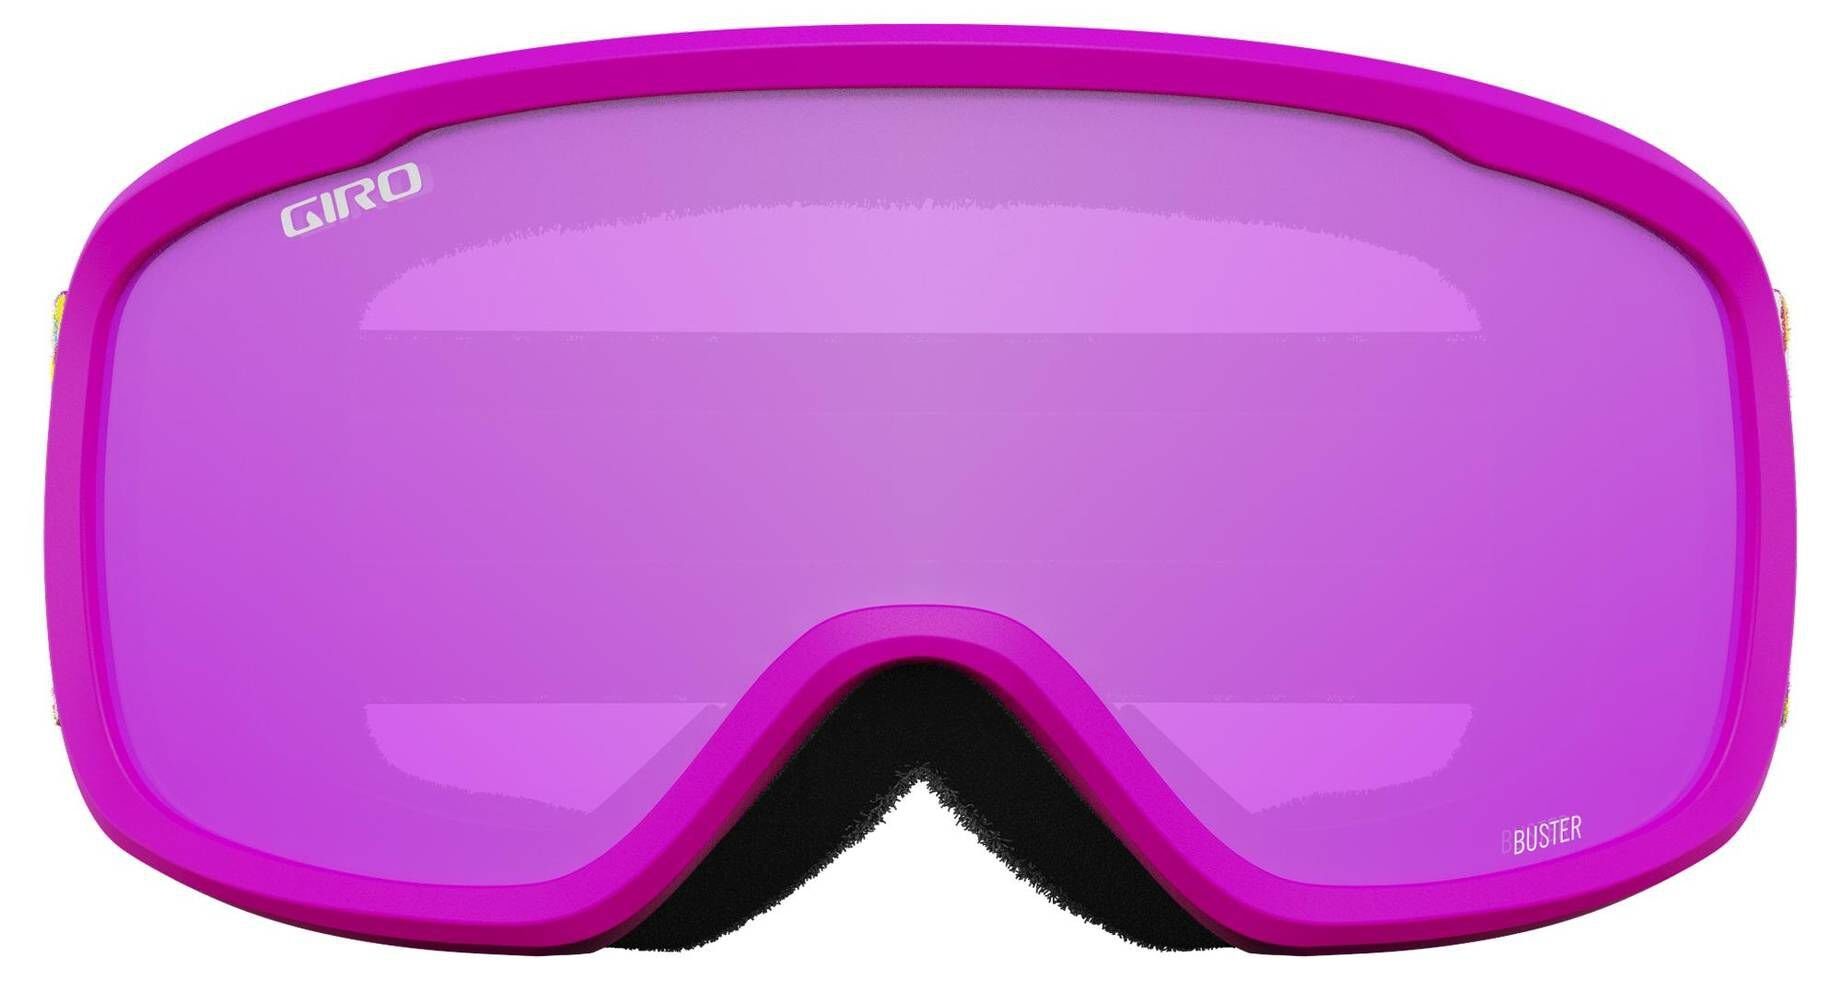 Giro Skibrille wollweiss Skibrille Kinder (101) SNOW GOGGLE BUSTER